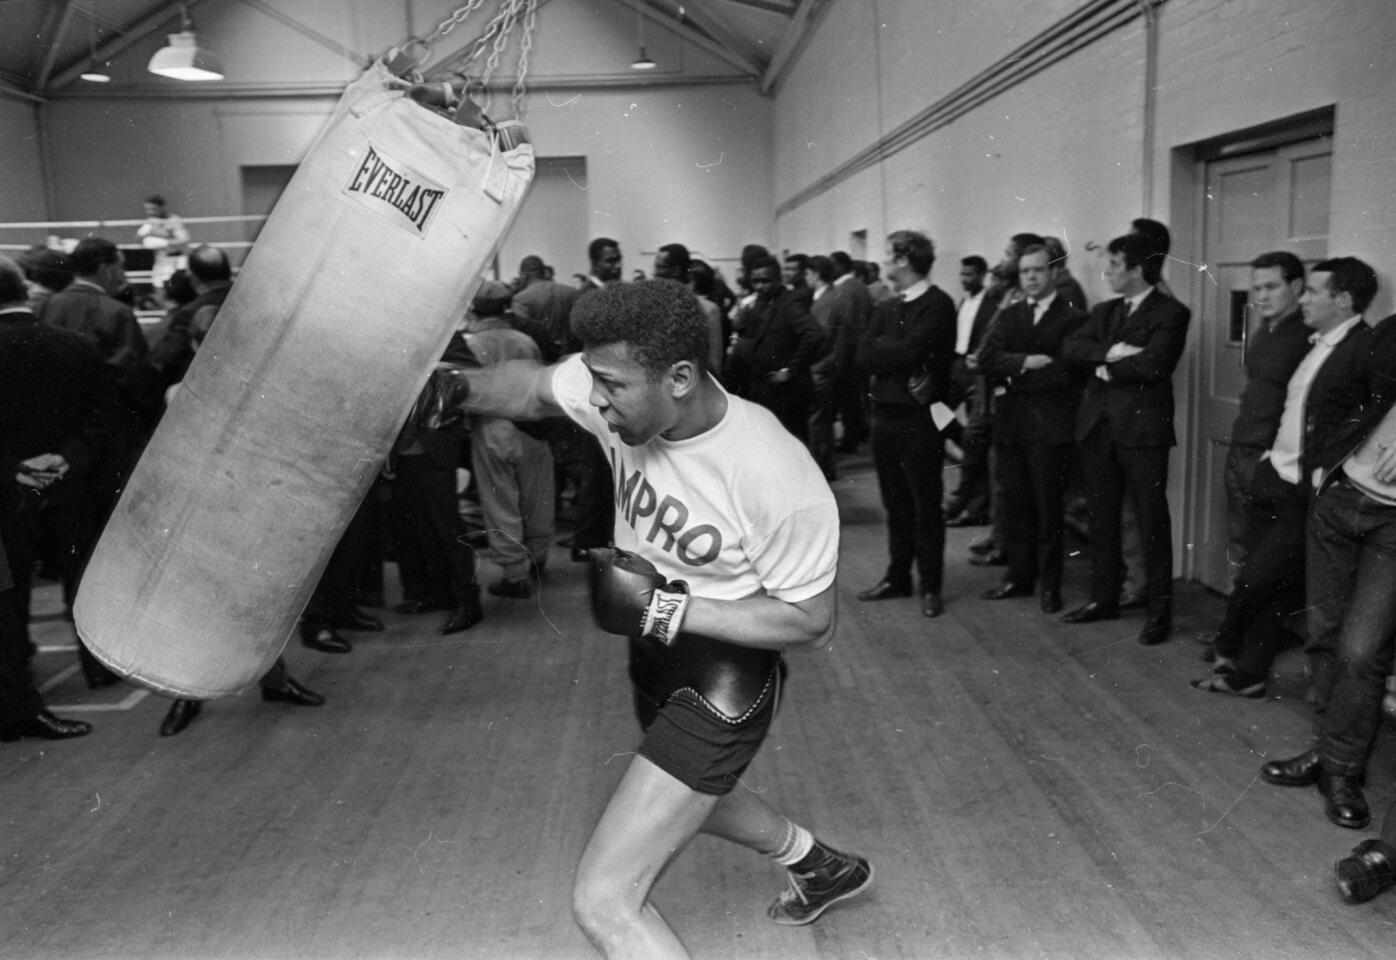 Ex-boxing champion Jimmy Ellis, seen here in 1966, died on May 7, 2014, at the age of 74. He was a onetime sparring partner for Muhammad Ali.